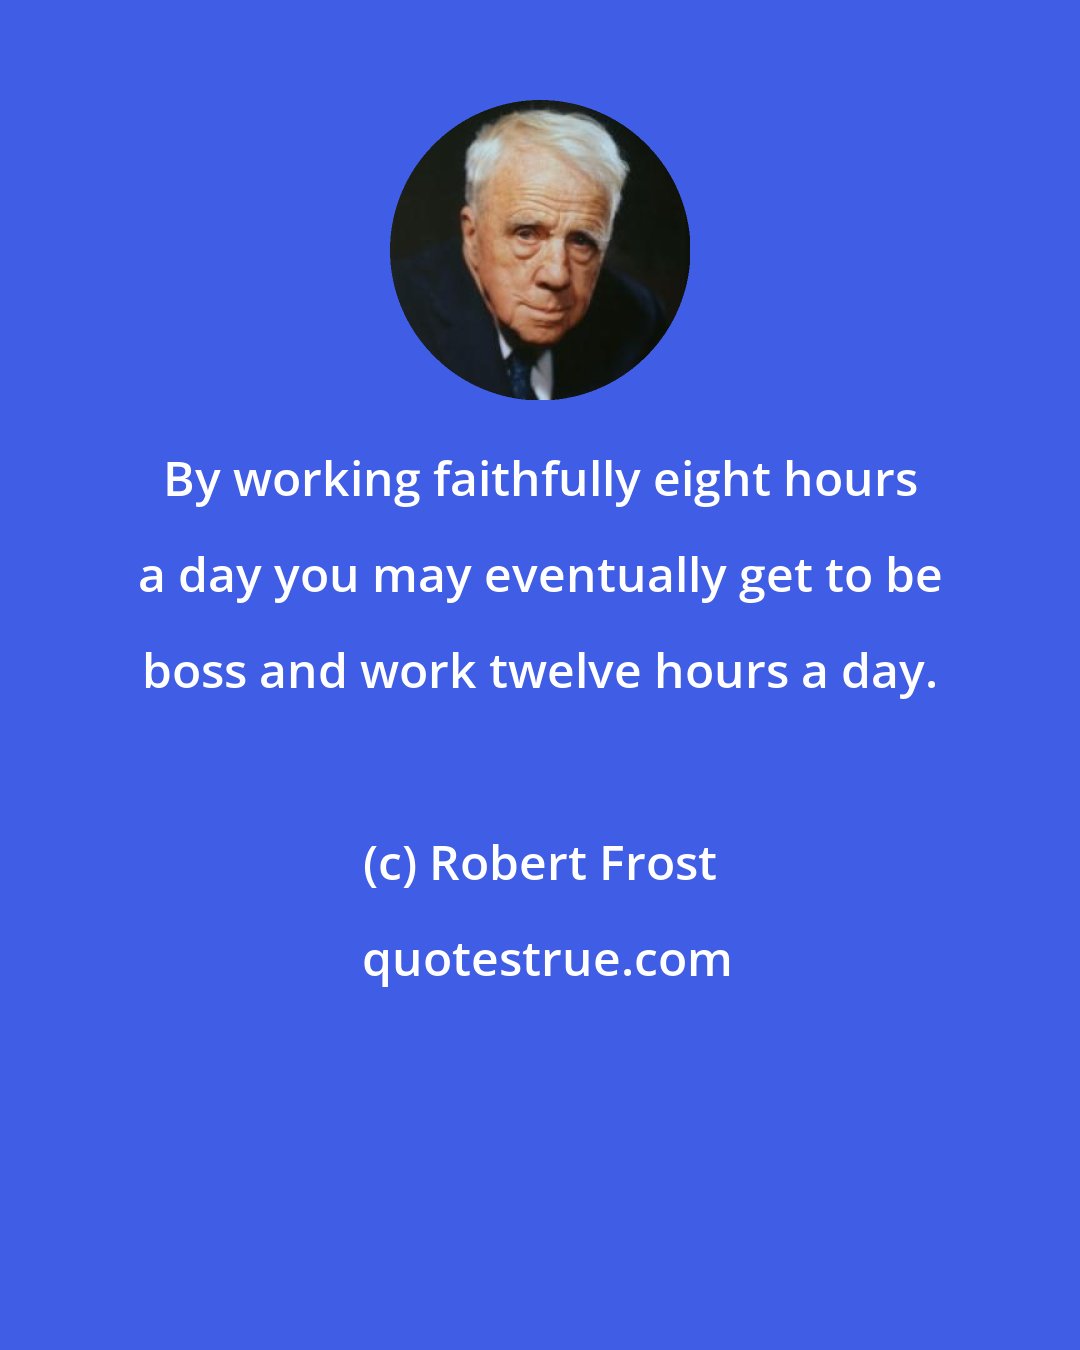 Robert Frost: By working faithfully eight hours a day you may eventually get to be boss and work twelve hours a day.